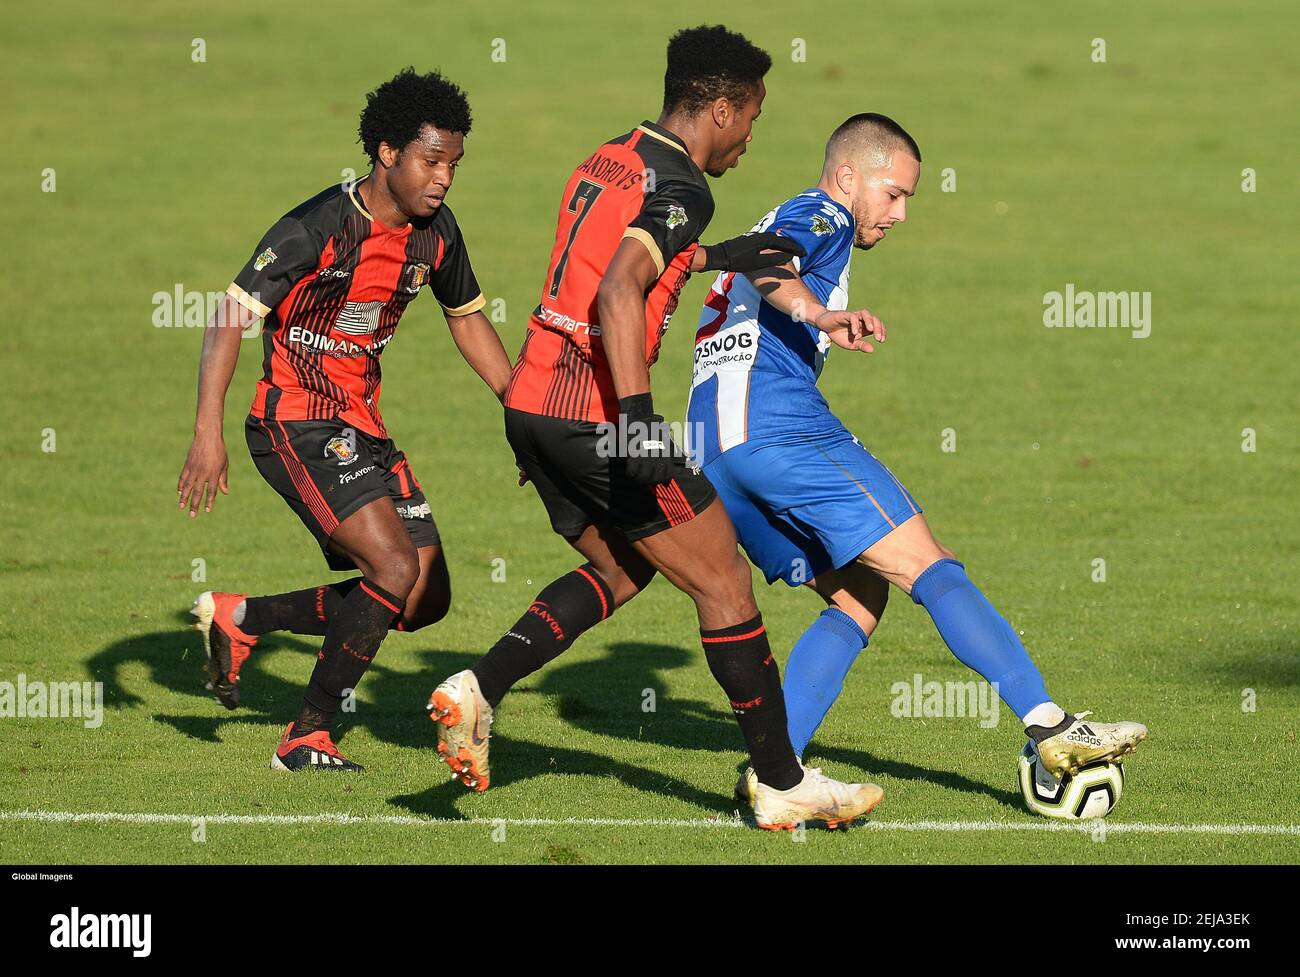 Marco de Canaveses, 01/12/2020 - Futebol Clube de Alpendorada welcomed  Atletico Clube de Vila Meã this afternoon at Alpendurada Municipal Stadium  in a match counting for the 18th round of AF Porto -